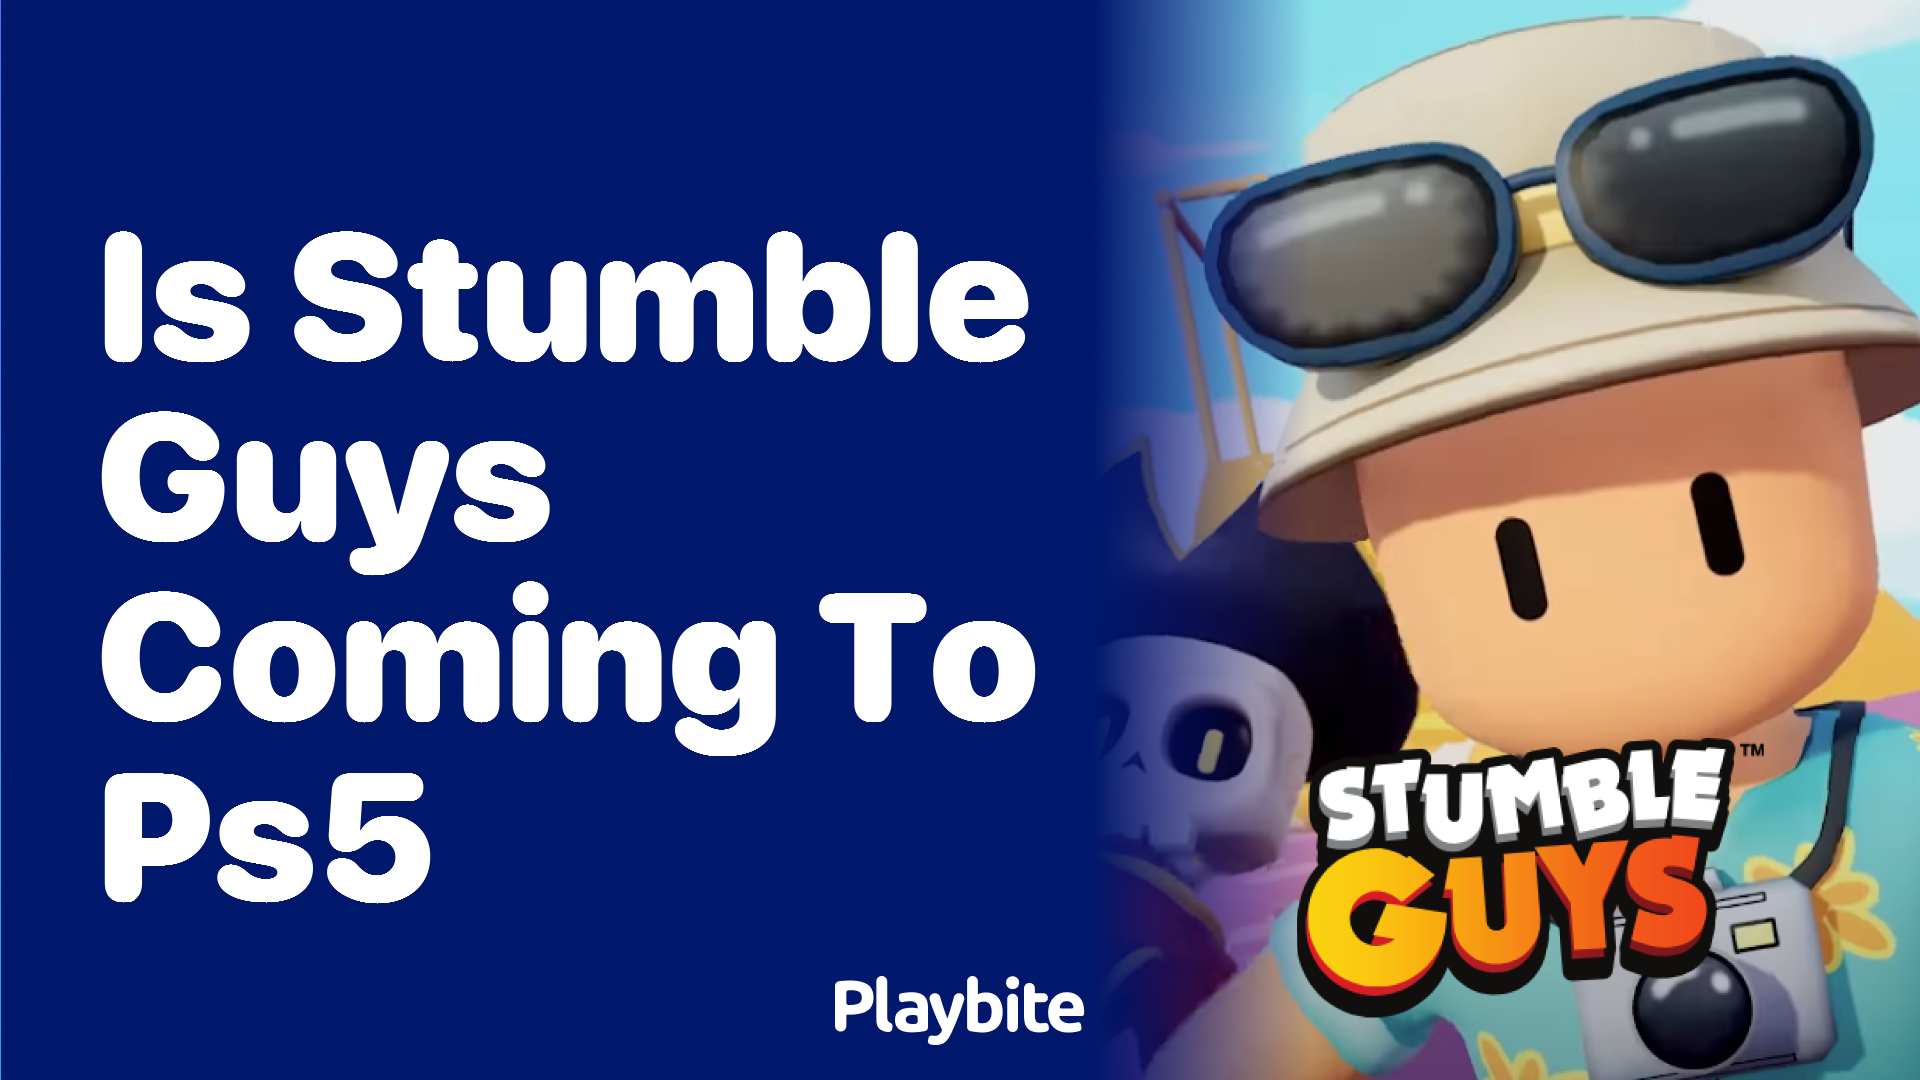 Is Stumble Guys Coming to PS5?